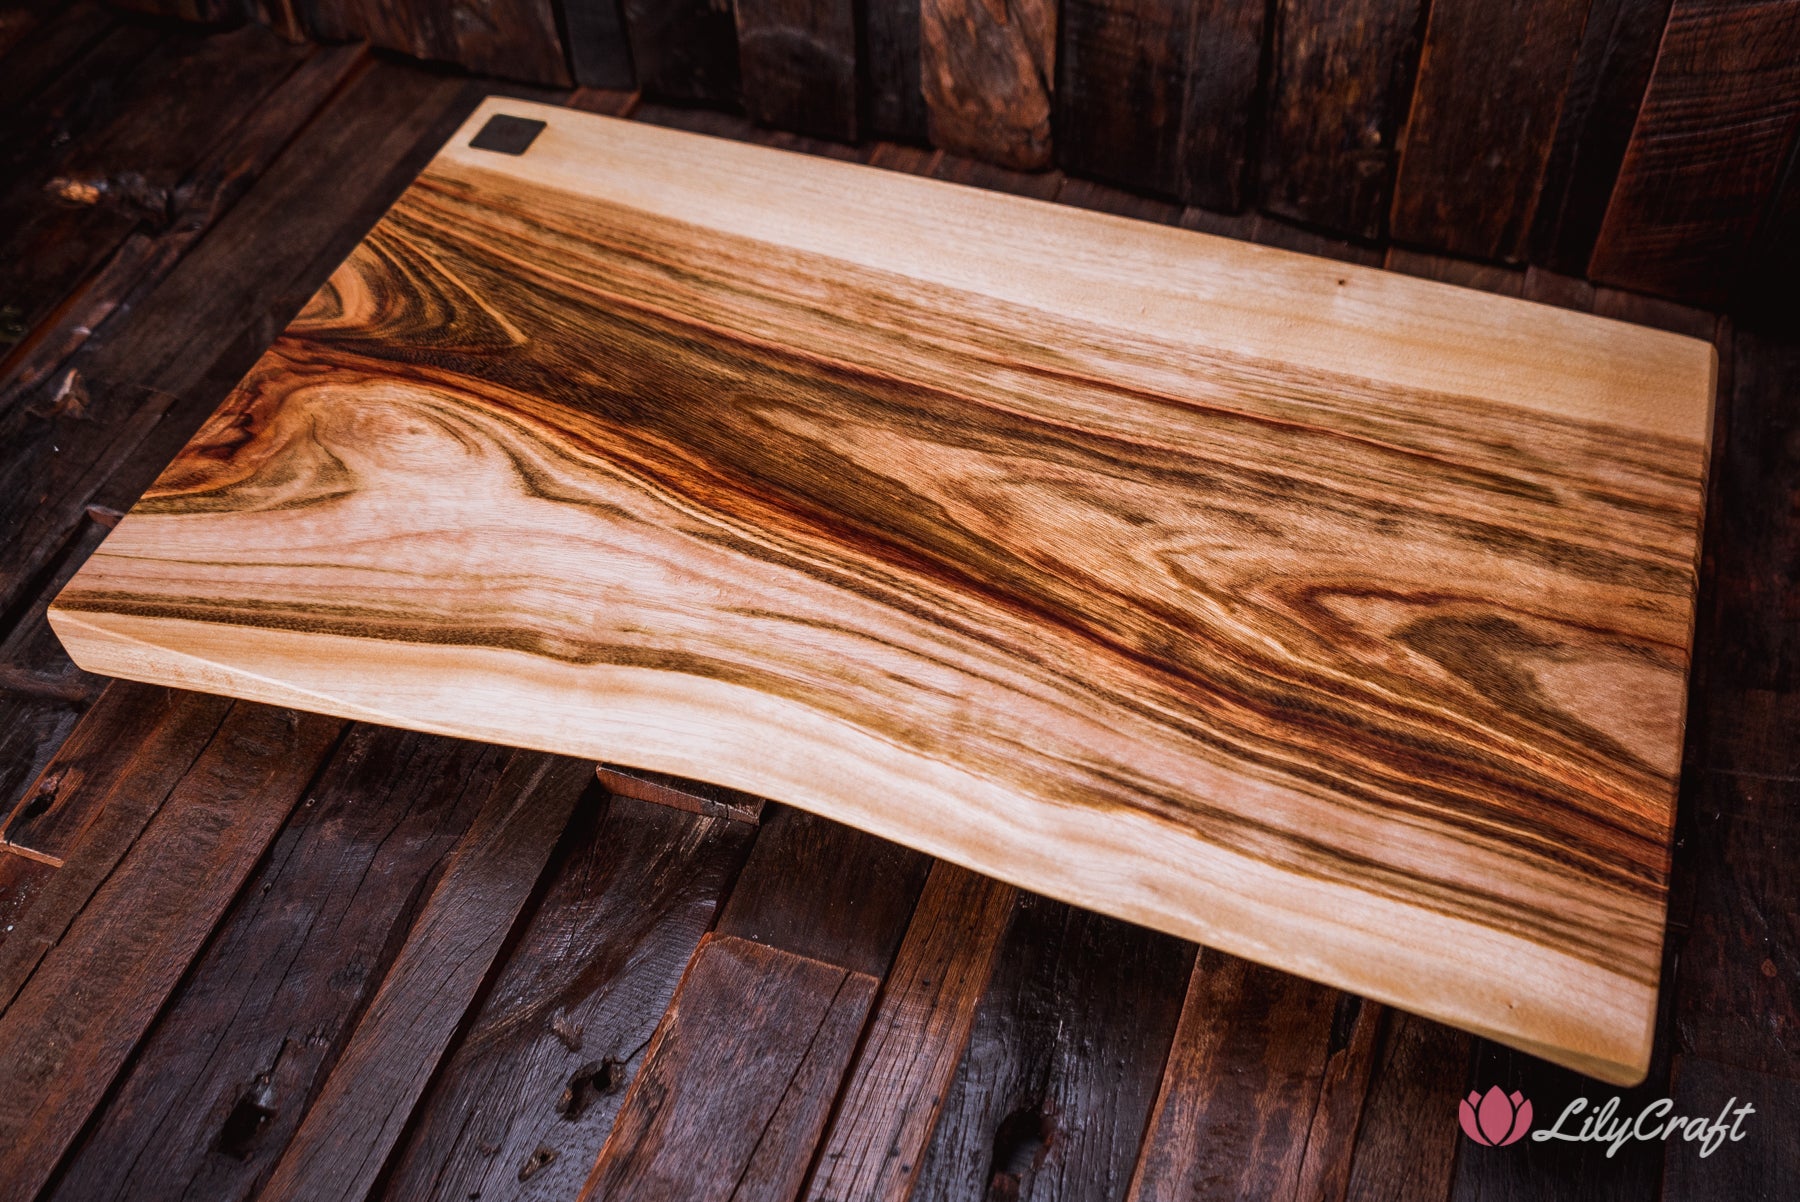 Live Edge Engraved Serving Board - The Natural edge cheese board.